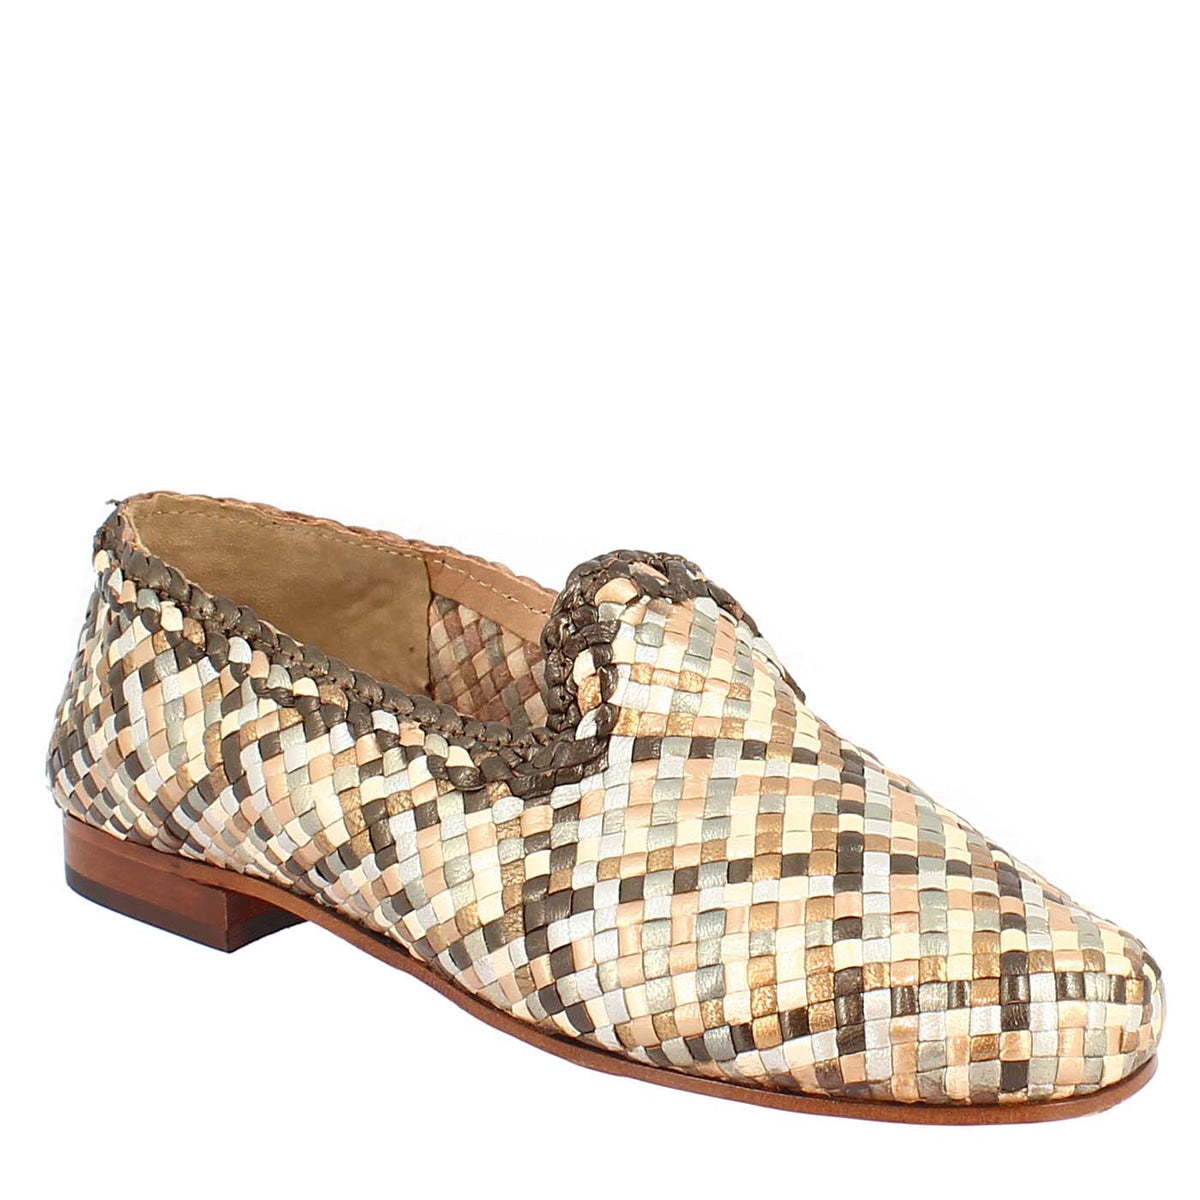 Handmade women's moccasins in beige, bronze and white woven leather.